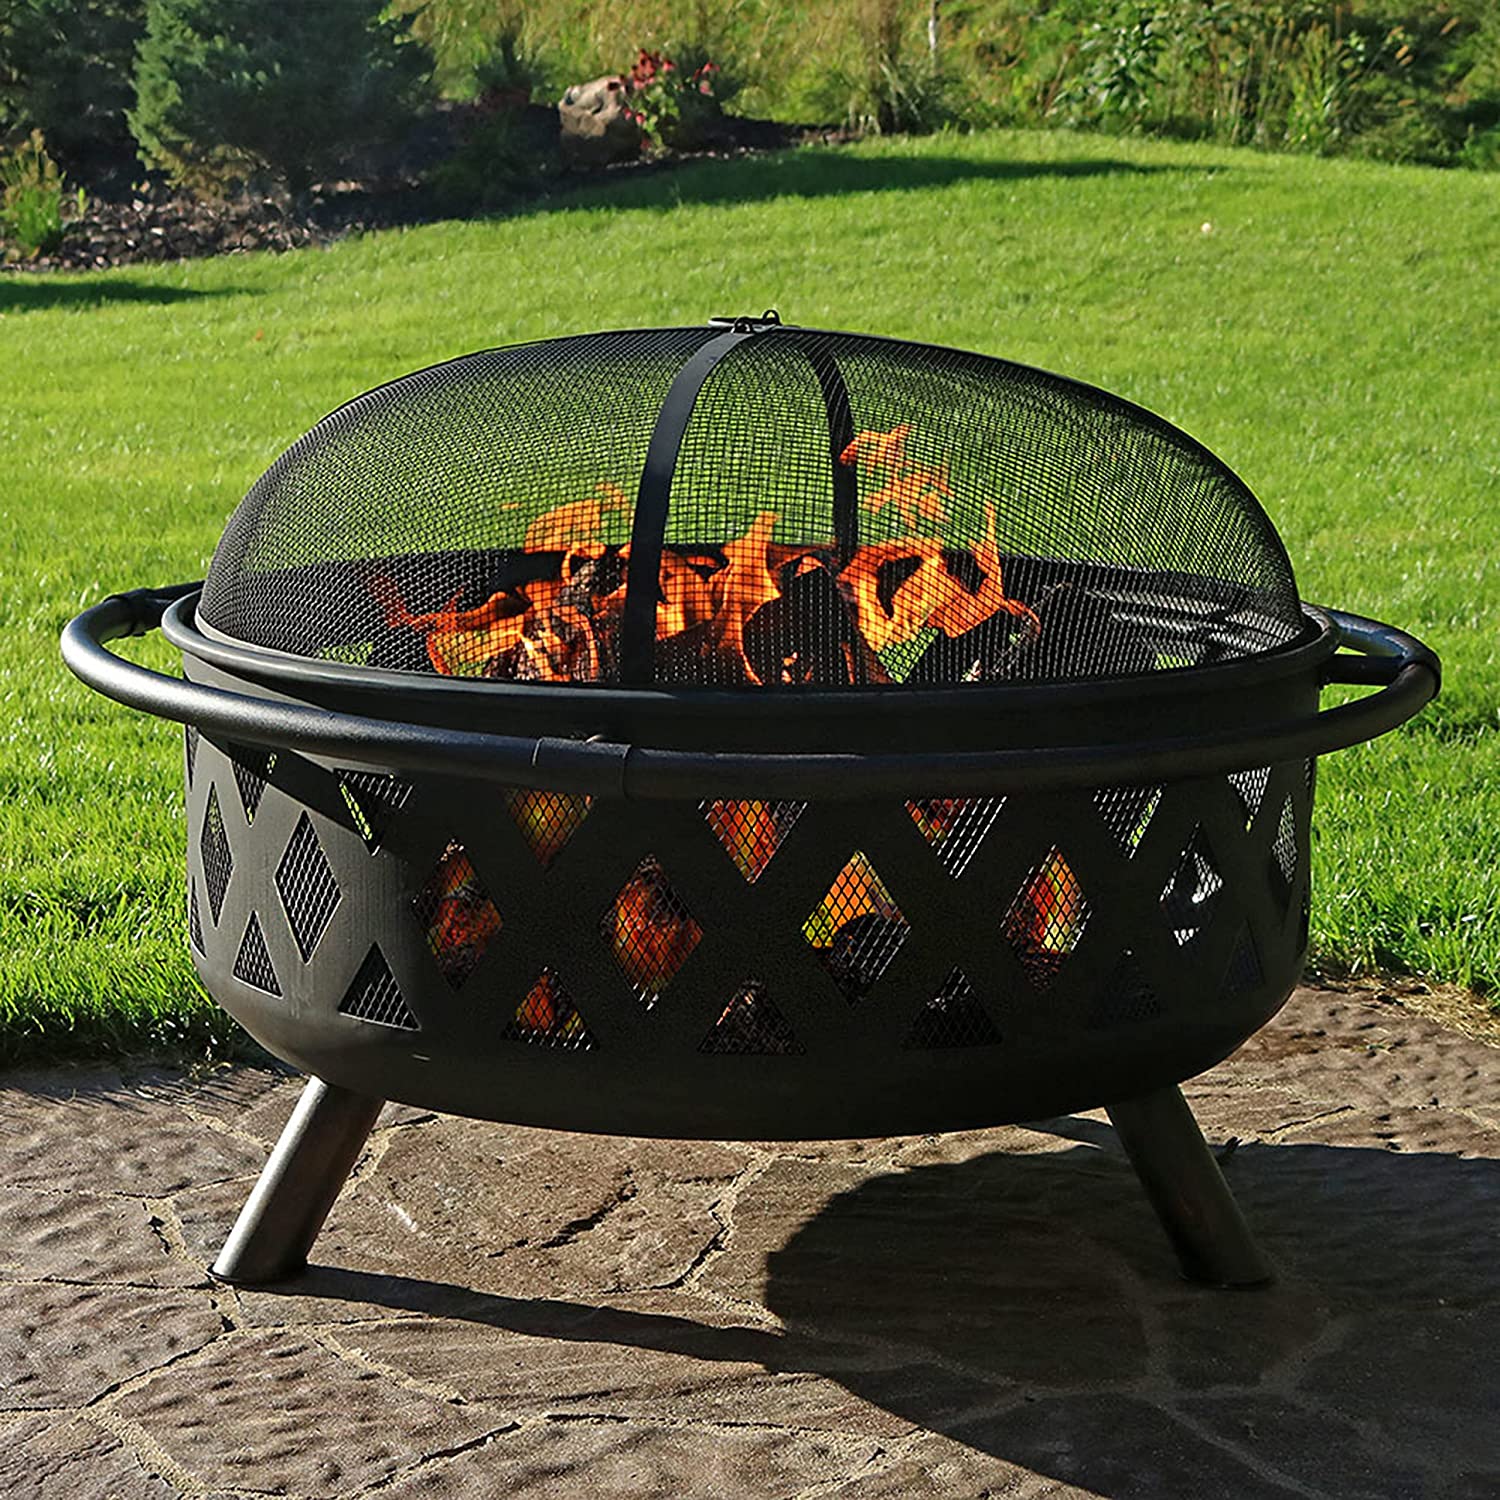 Sunnydaze Black Crossweave Large Outdoor Fire Pit - 36-Inch Heavy-Duty Wood-Burning Fire Pit with Spark Screen for Patio and Backyard Bonfires - Includes Poker and Round Fire Pit Cover